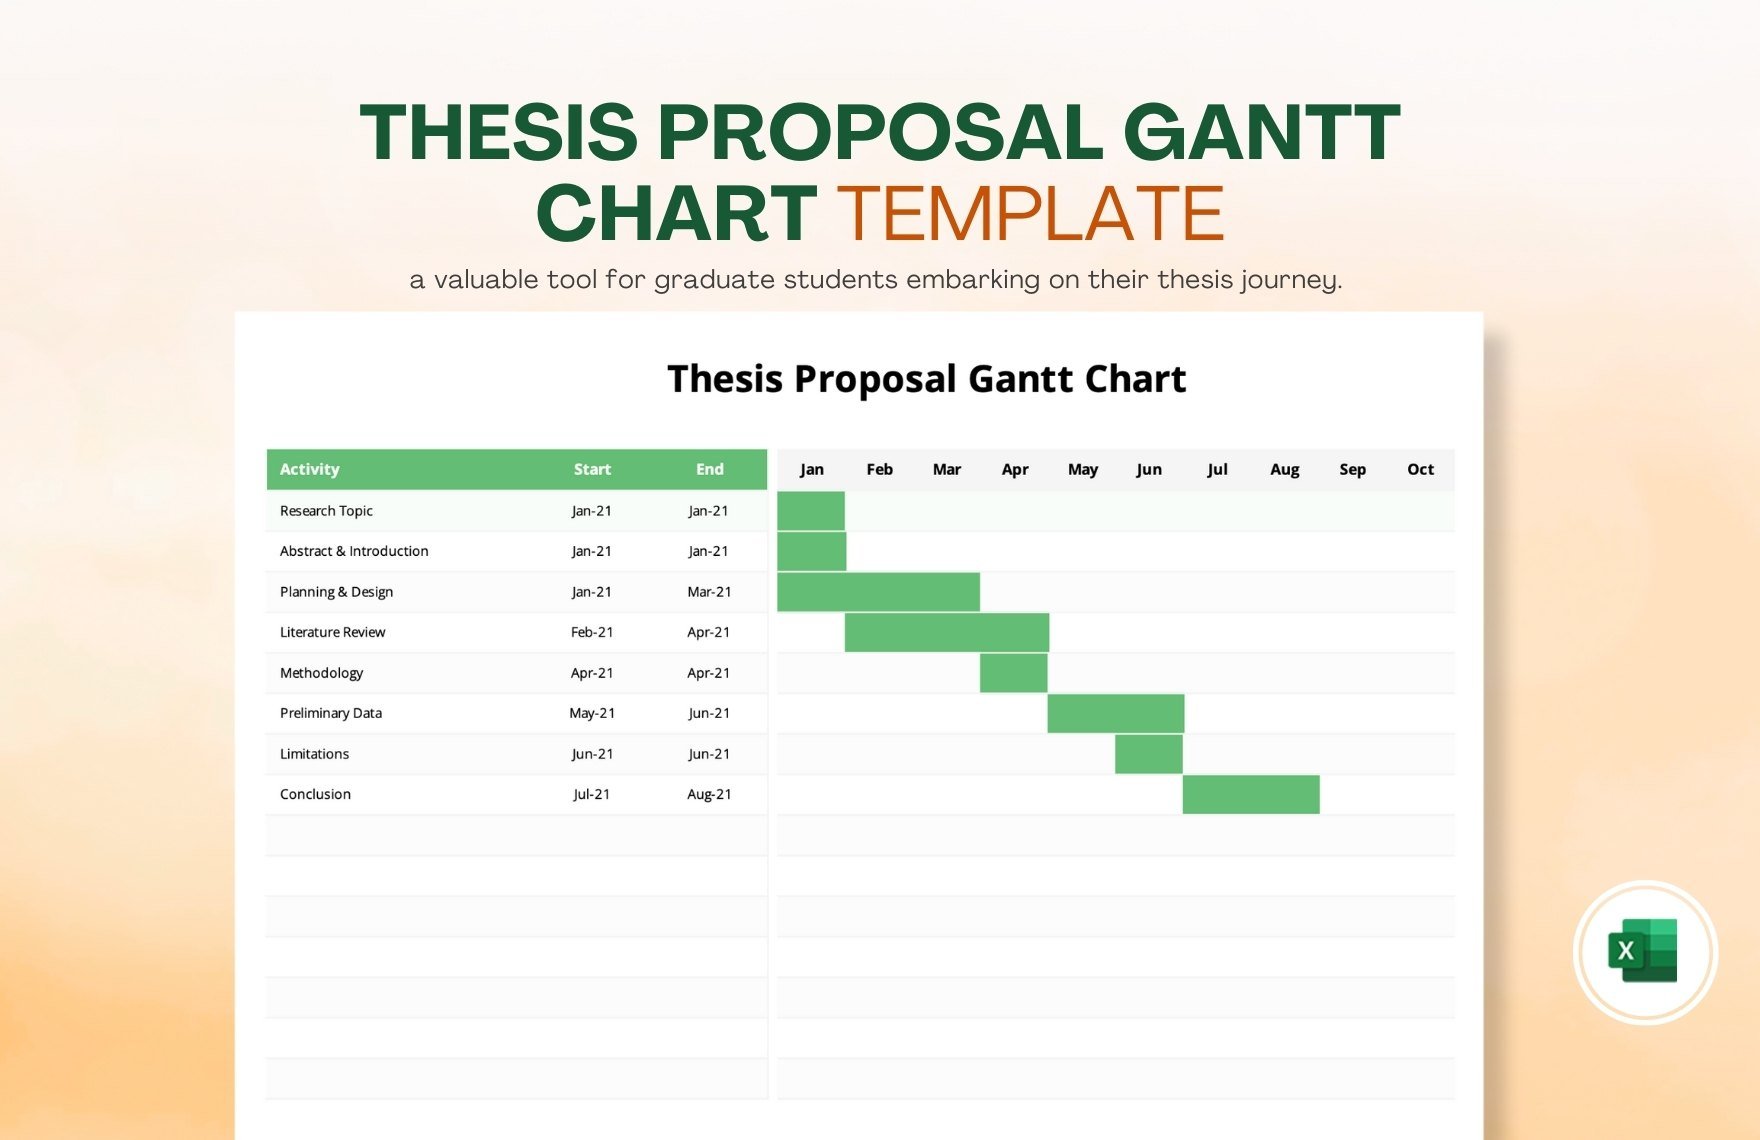 Thesis Proposal Gantt Chart Template in Excel